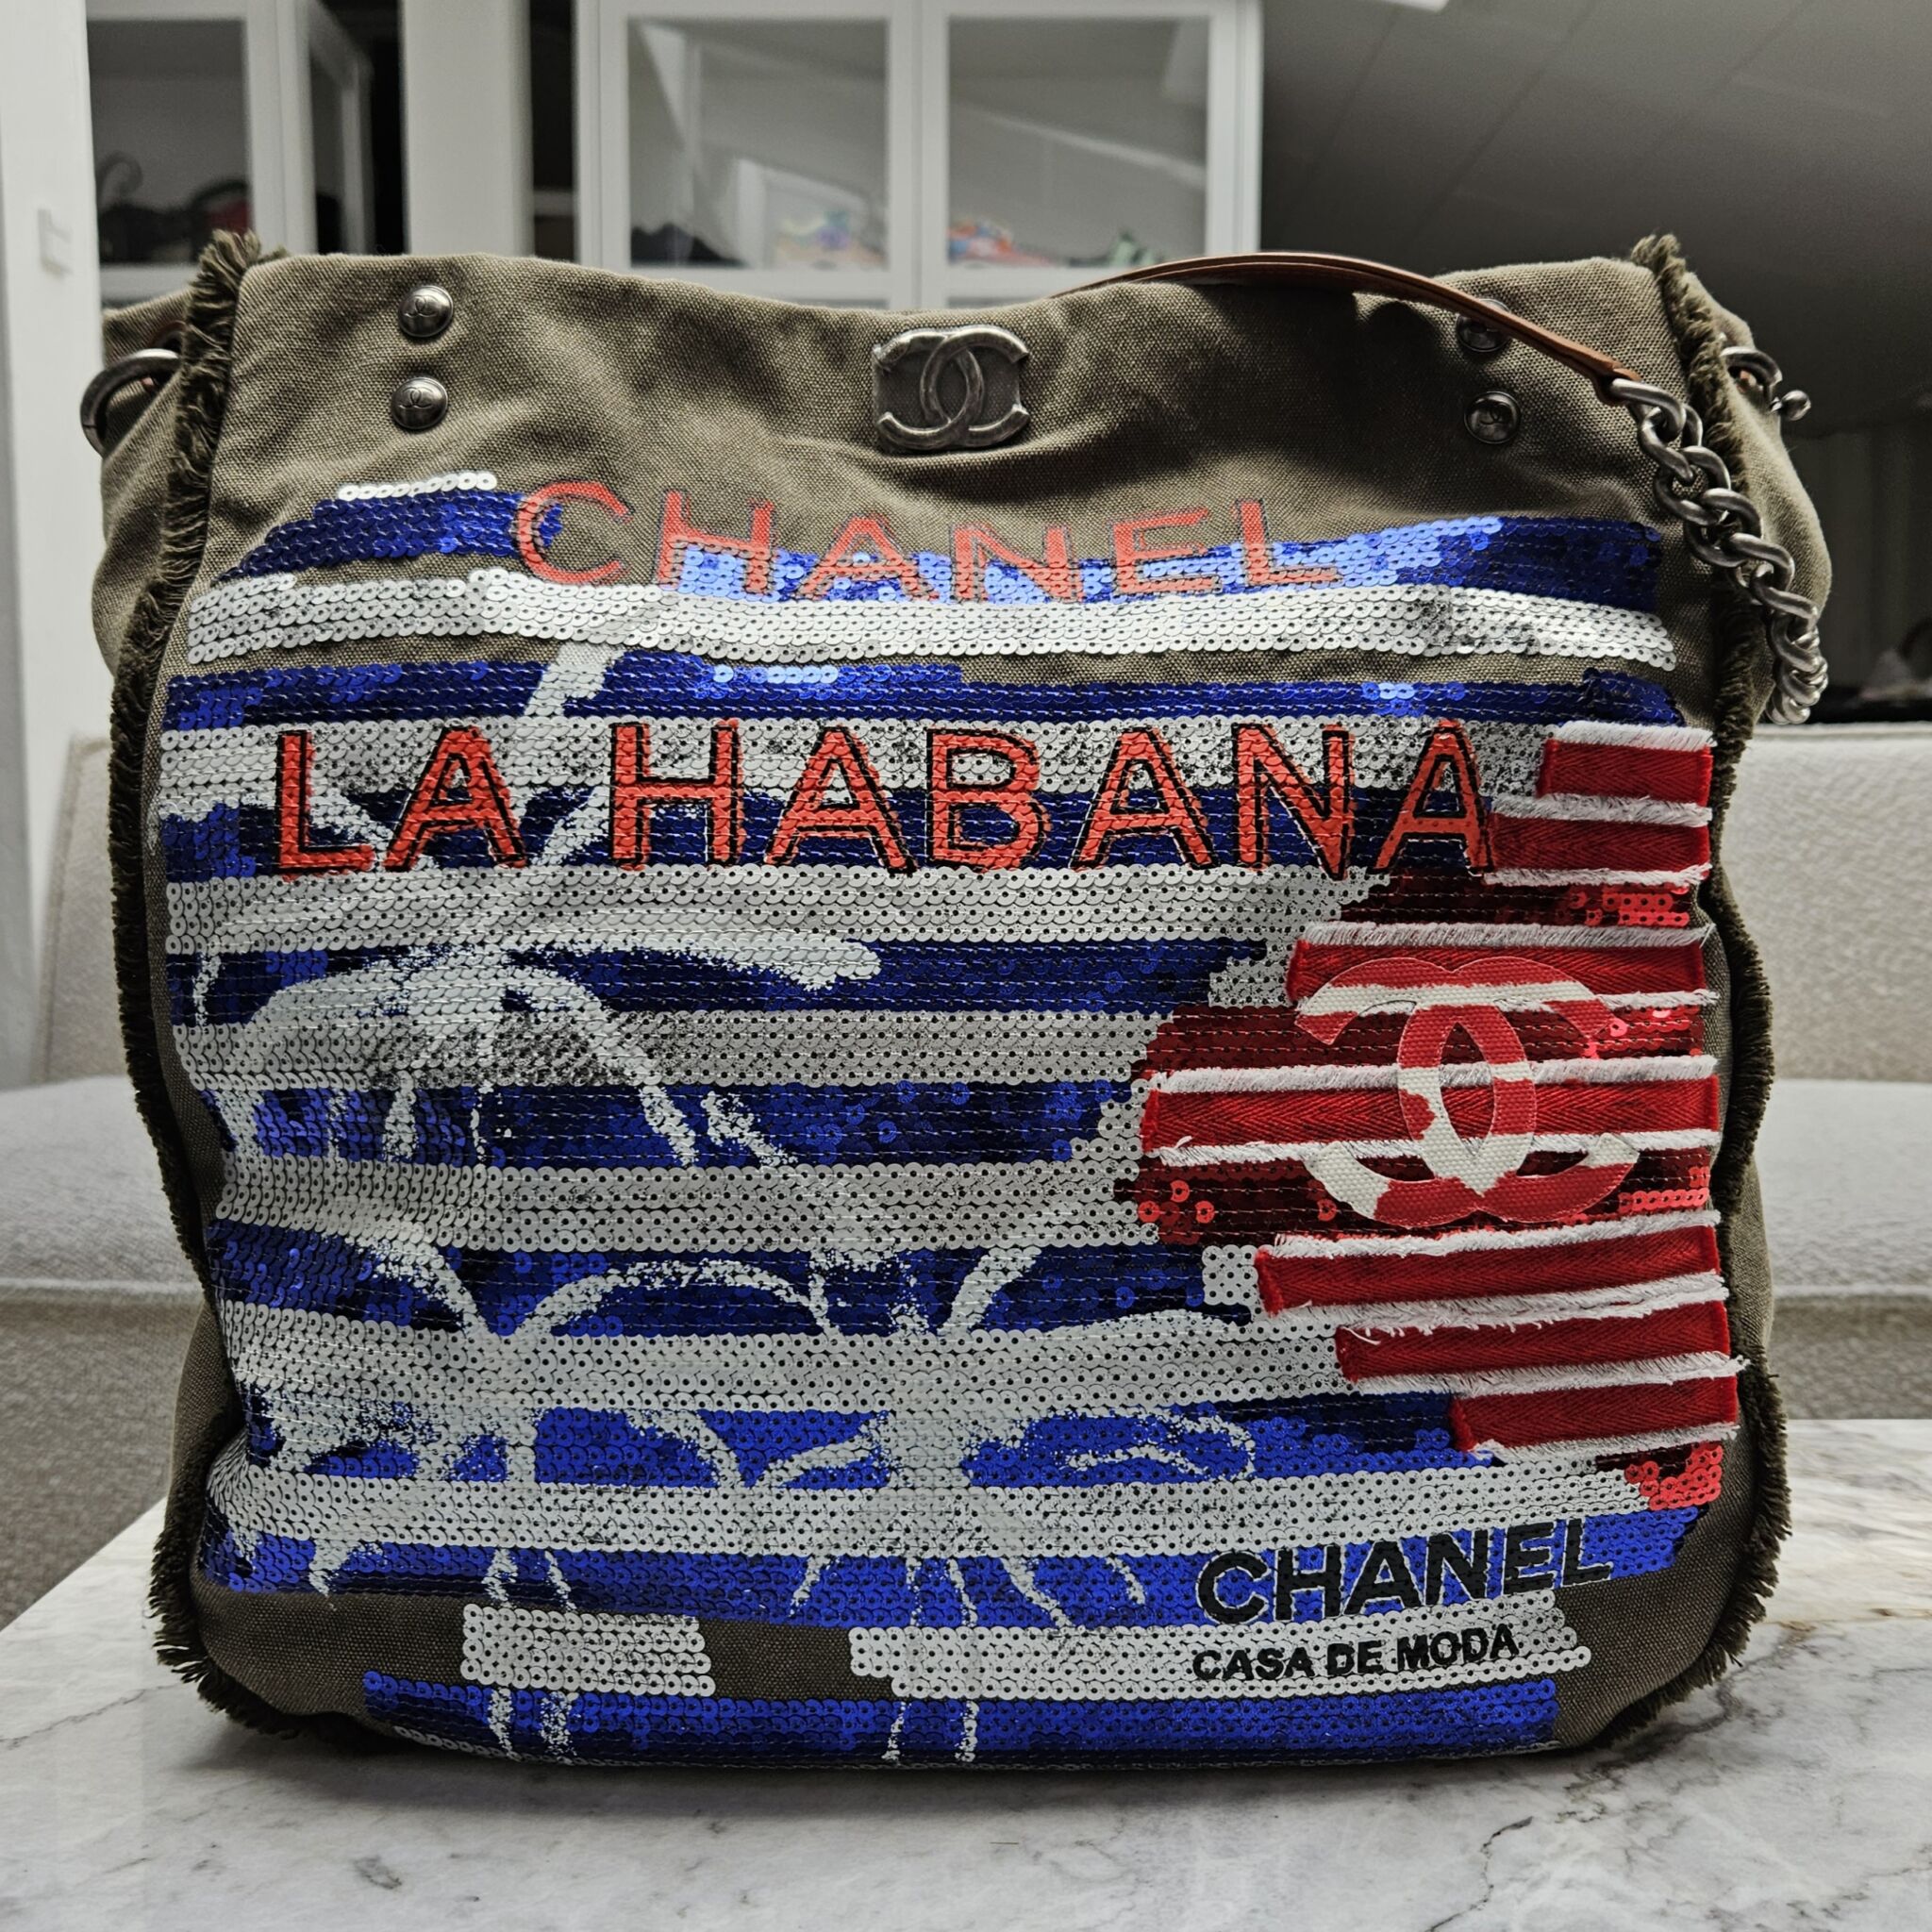 Chanel Large Coco Cuba Hobo, Canvas, Green/Red/Blue/White - Laulay